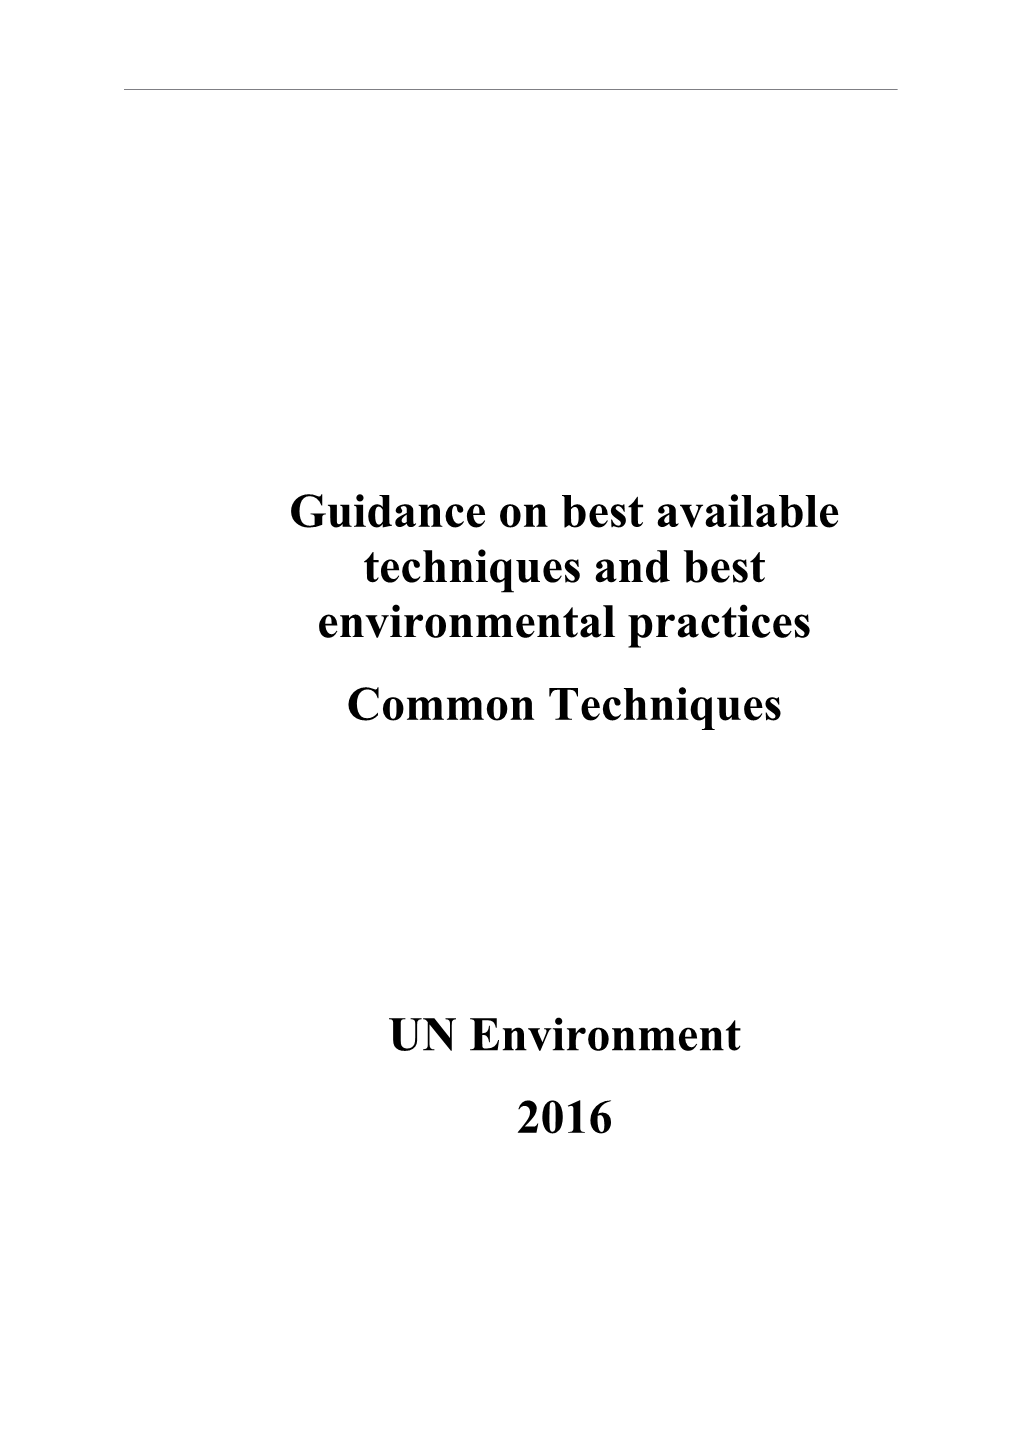 Guidance on Best Available Techniques and Best Environmental Practices